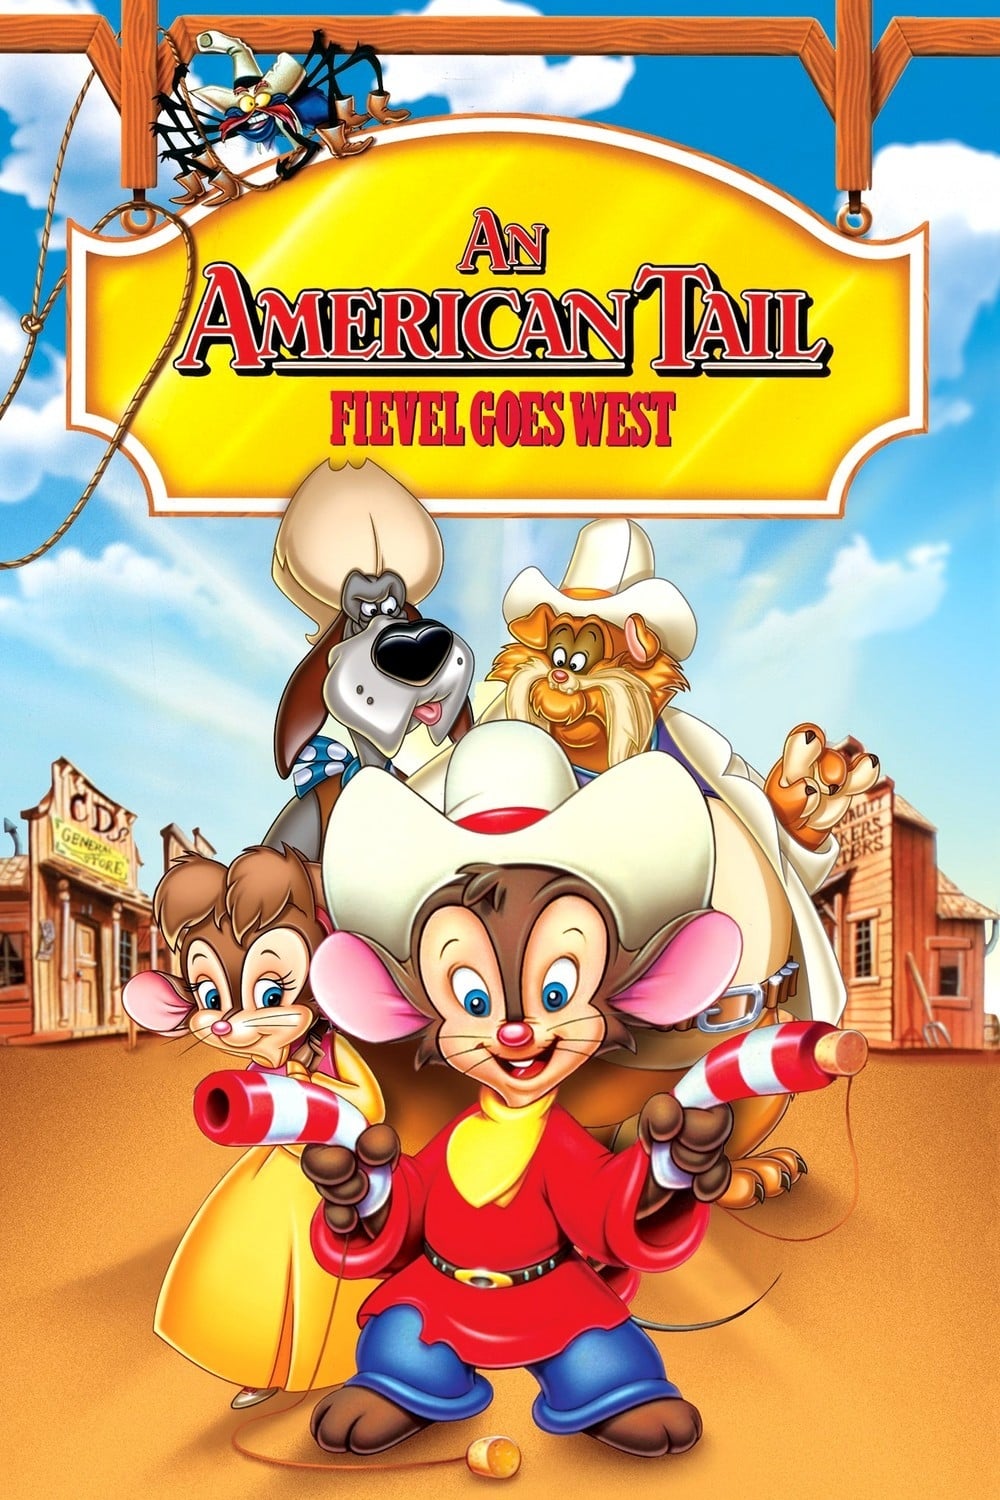 An American Tail: Fievel Goes West Picture